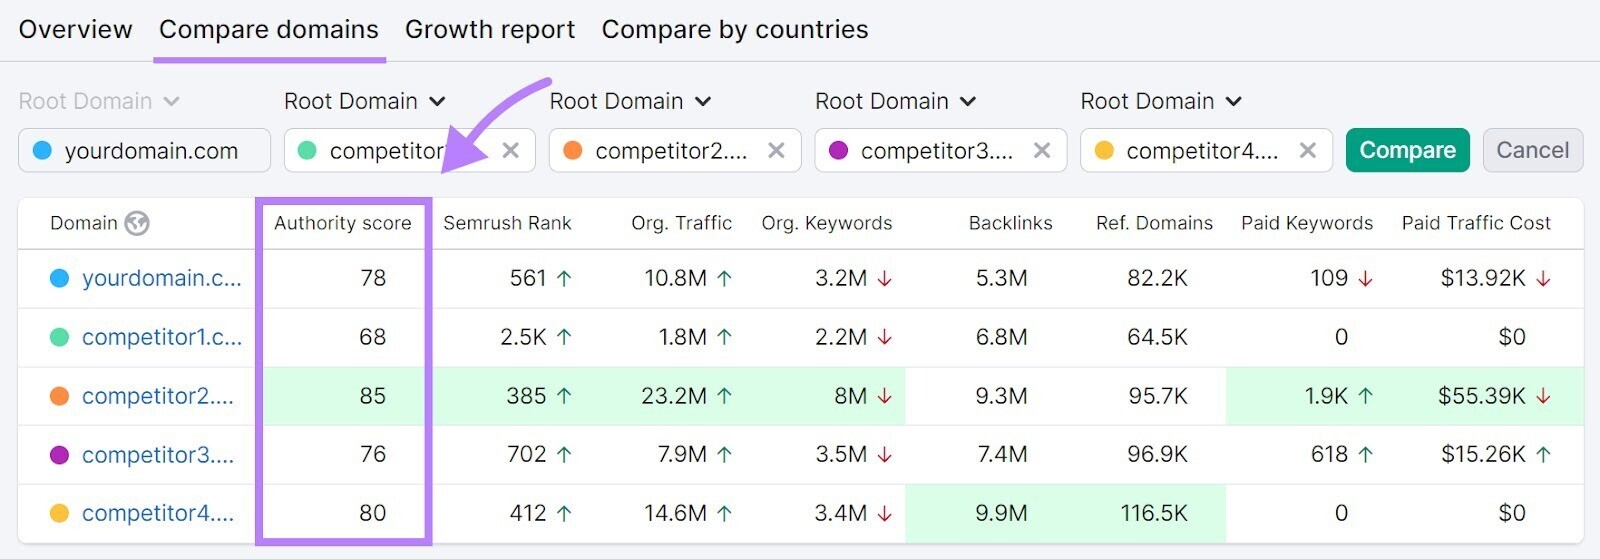 "Compare domains" table with every domain’s Authority Scores and other useful SEO metrics